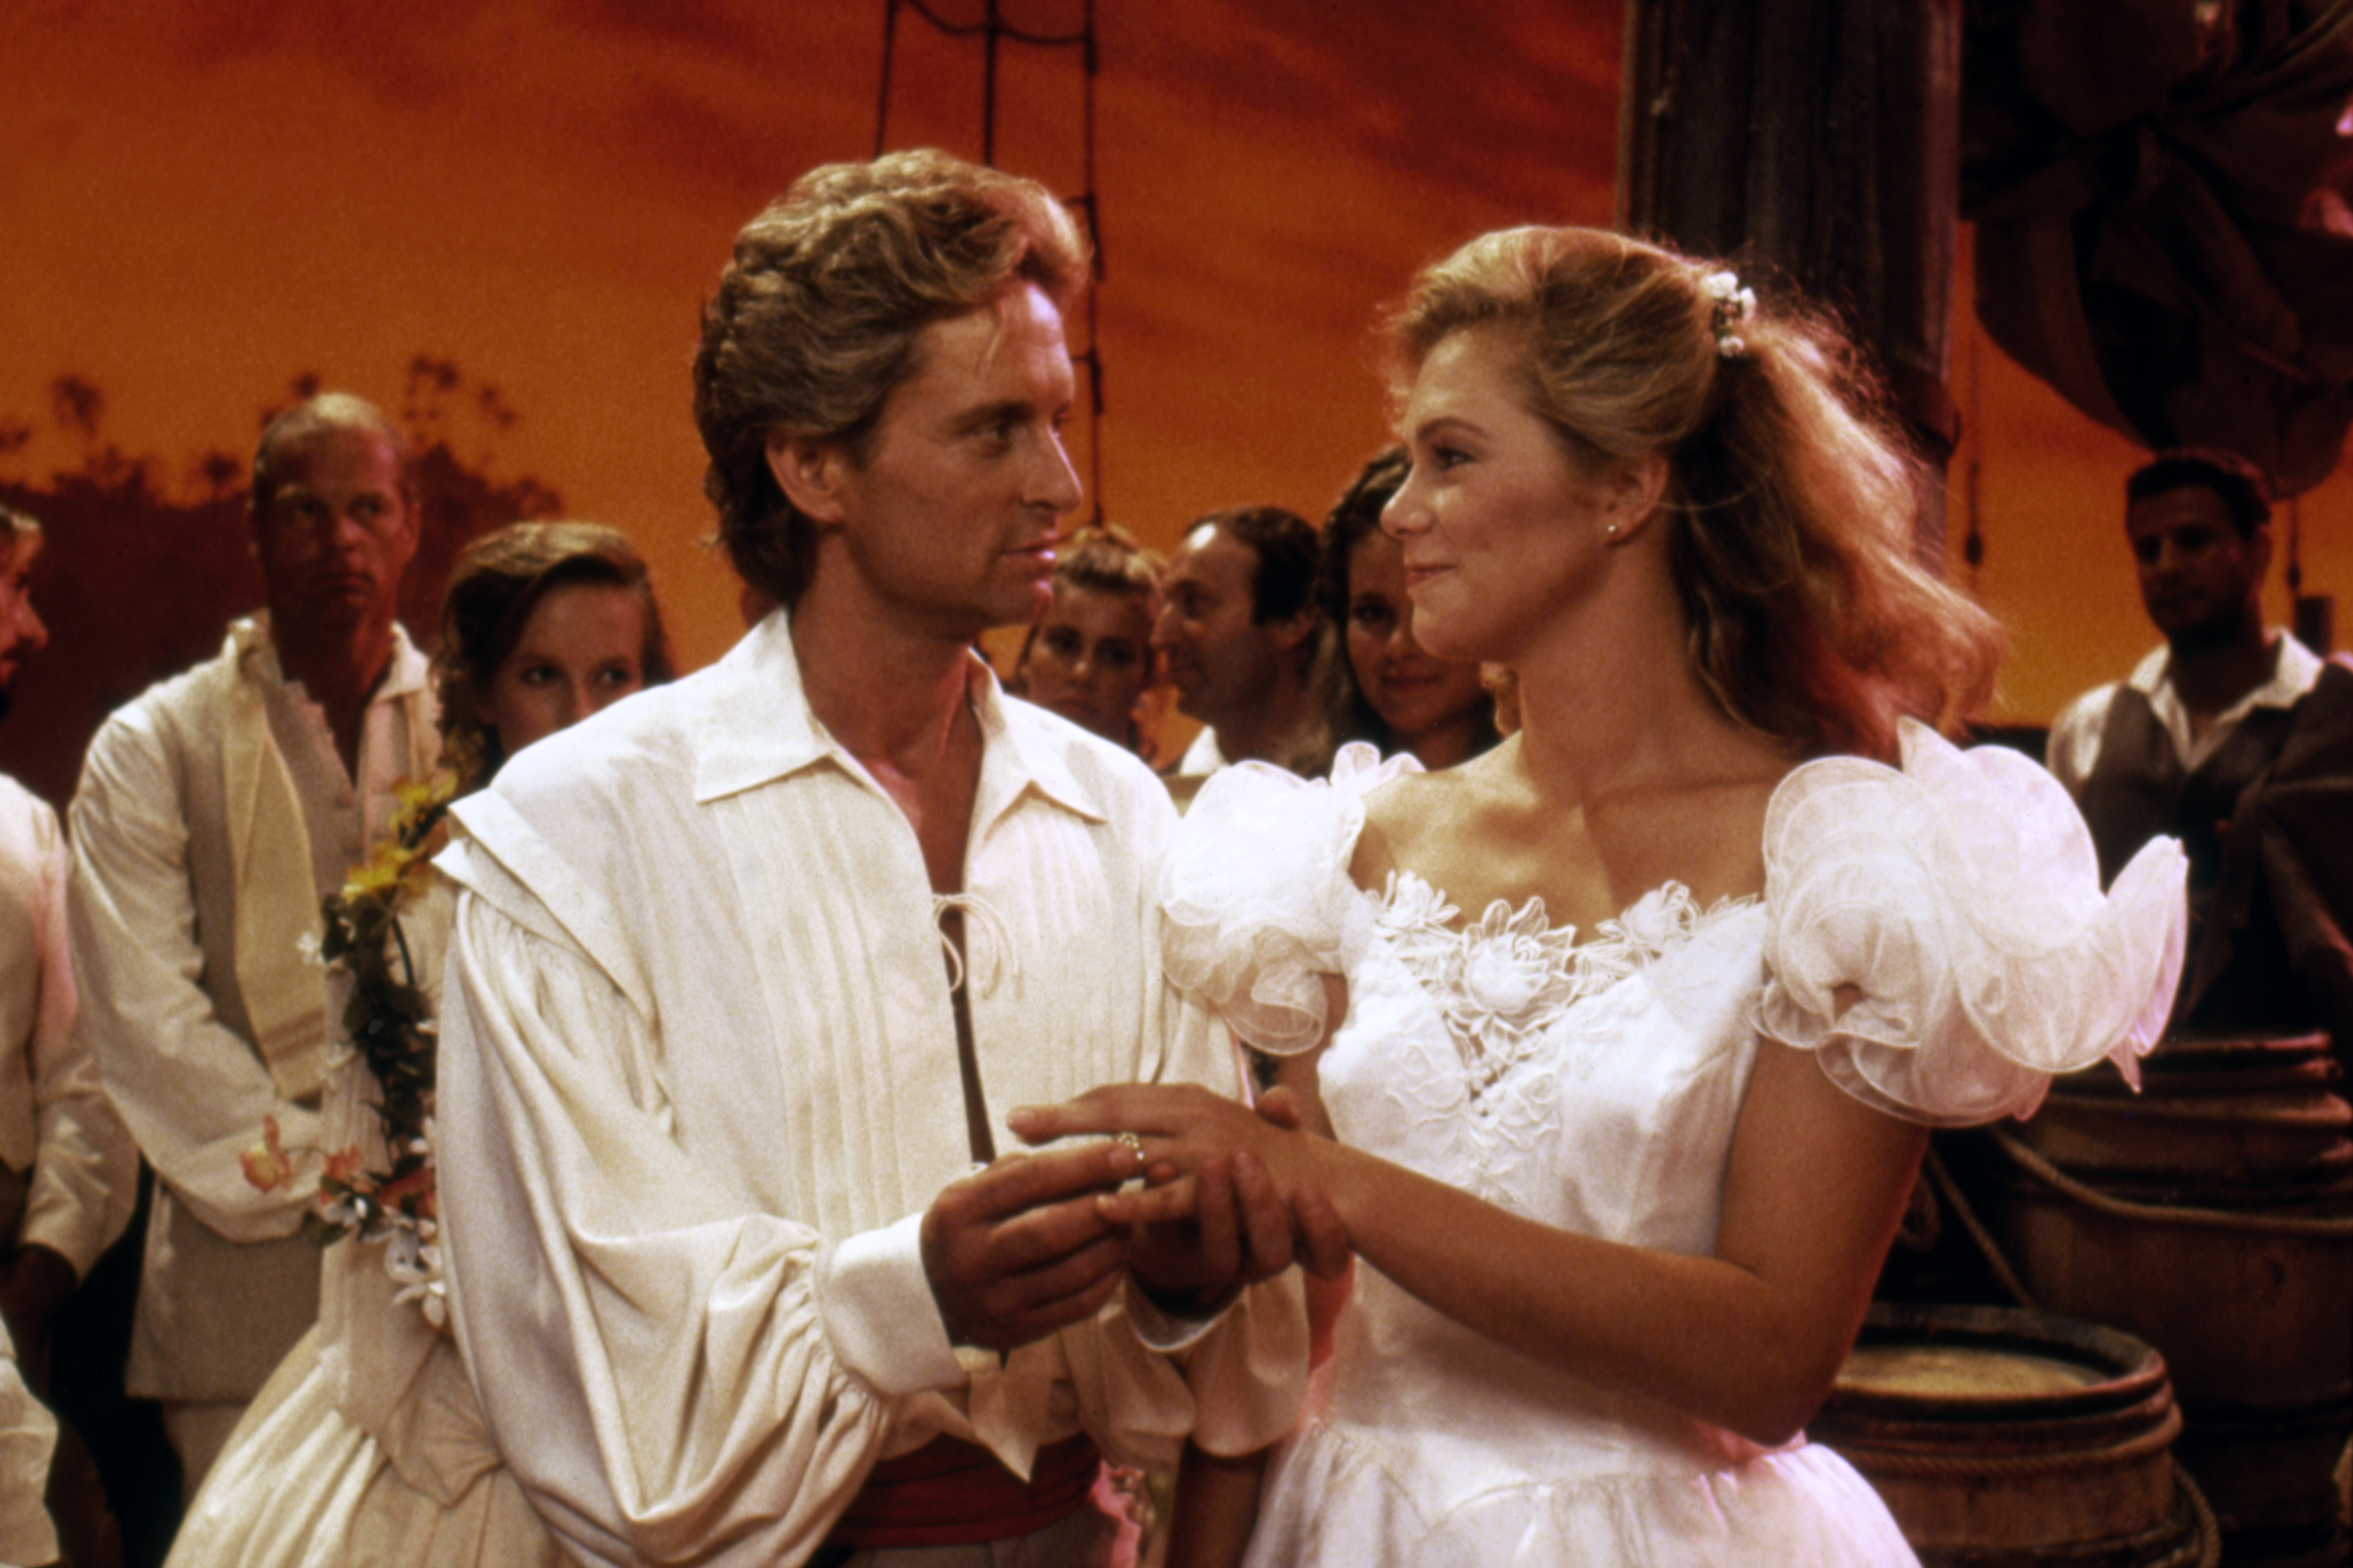 Michael Douglas and Kathleen Turner in "The Jewel of the Nile" in 1985. | Source: Getty Images